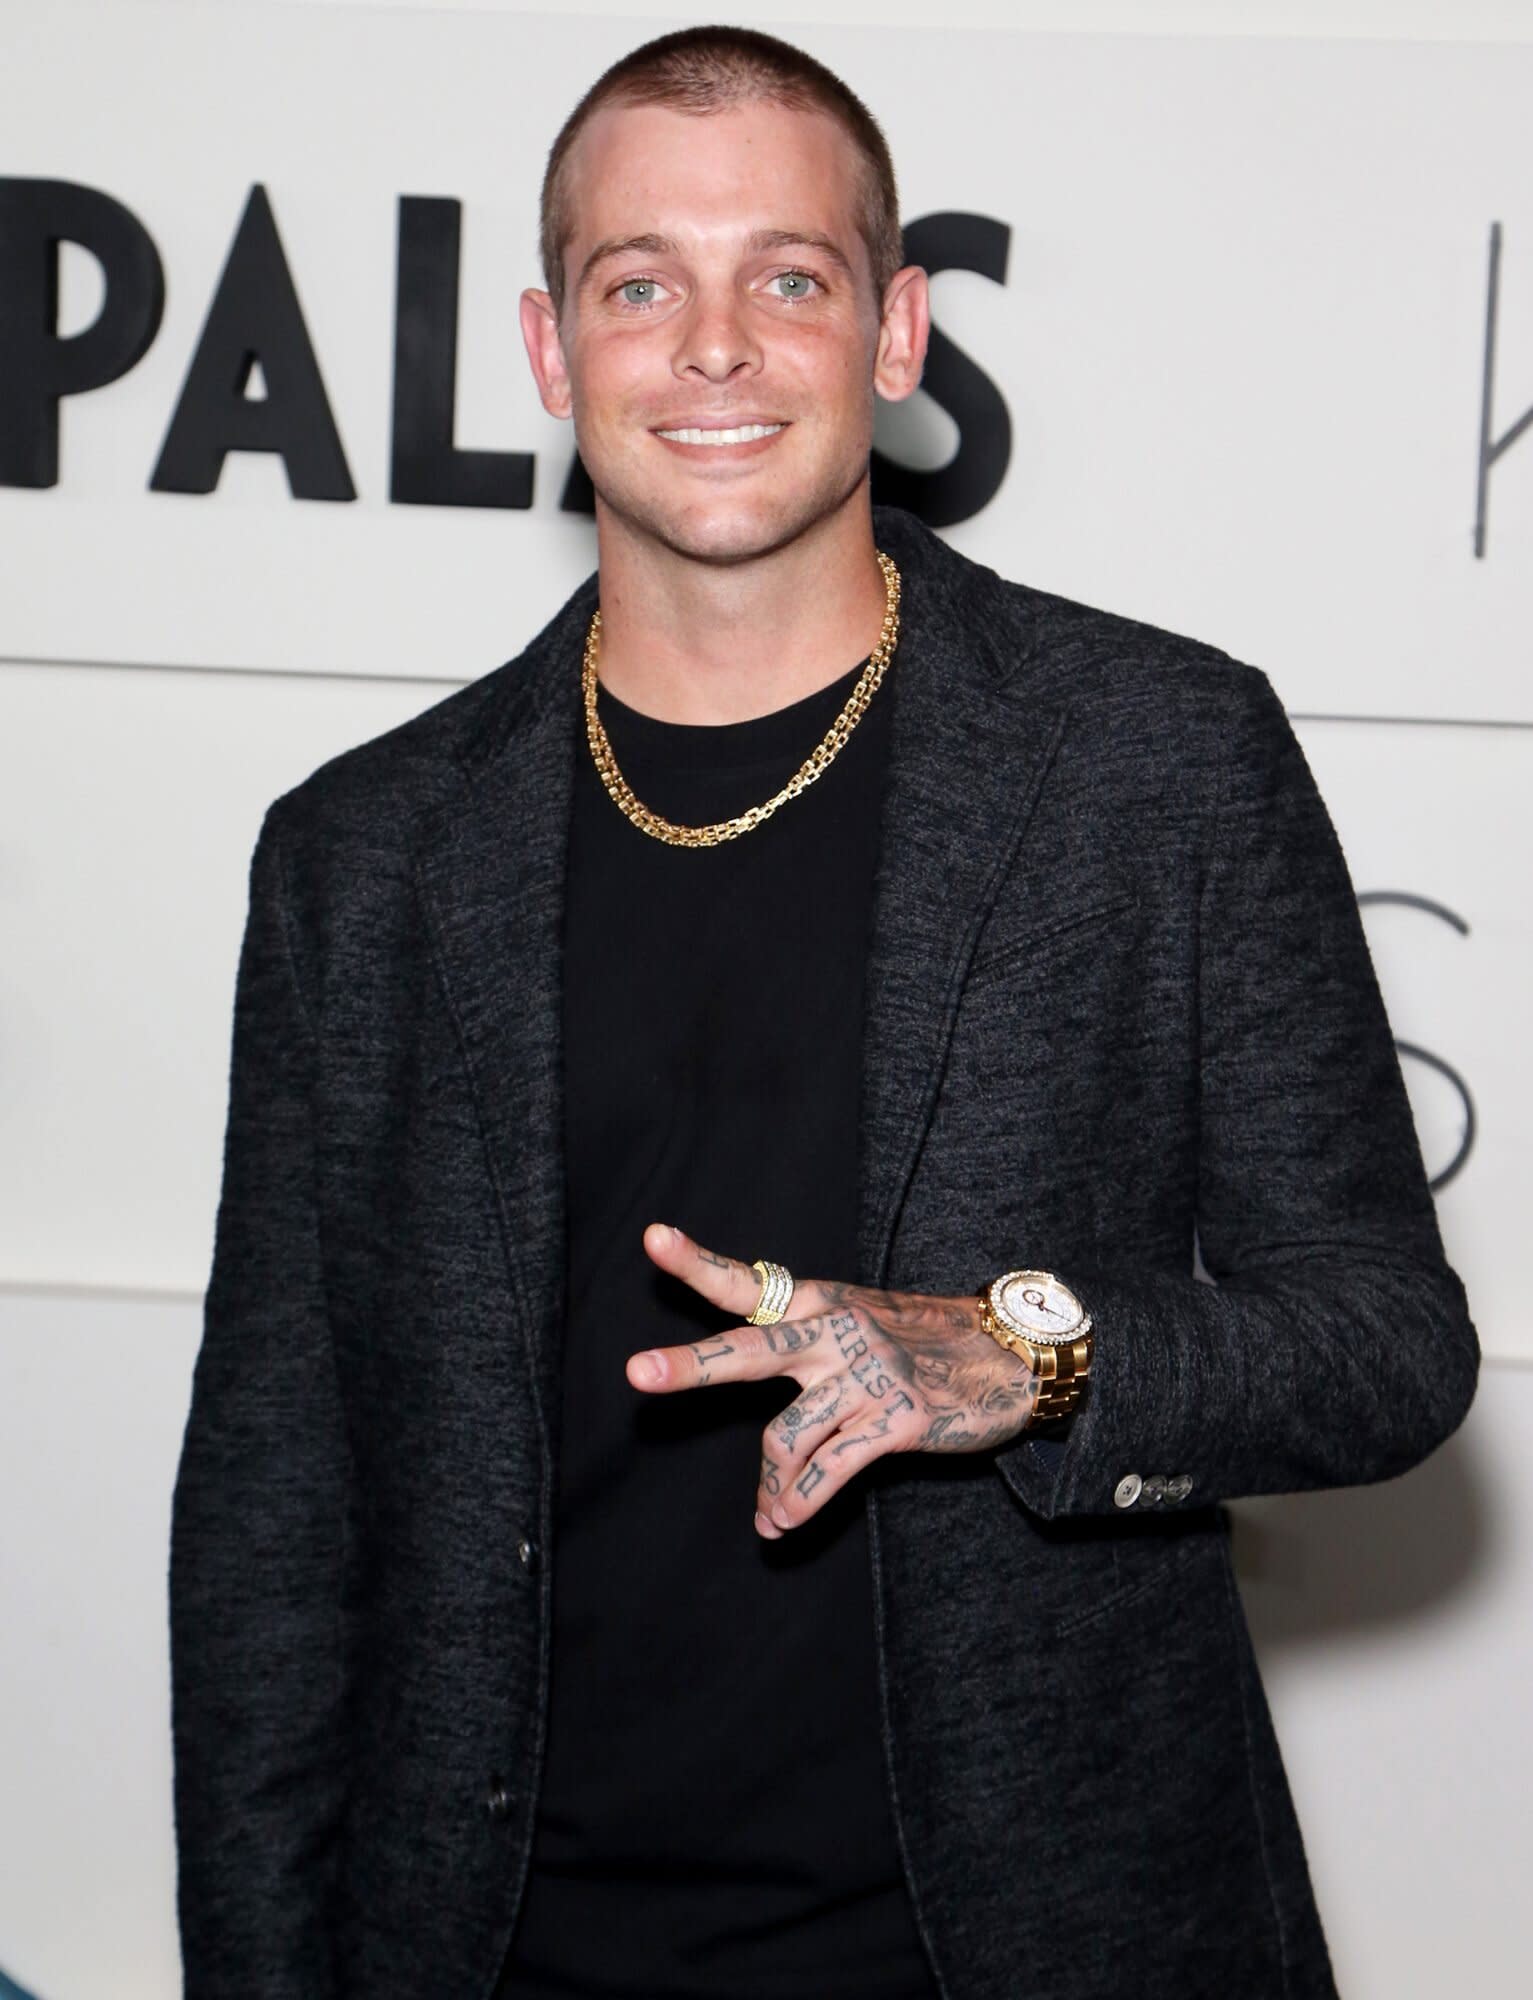 Skateboarder Ryan Sheckler Says He Stopped Dating For Years After Being